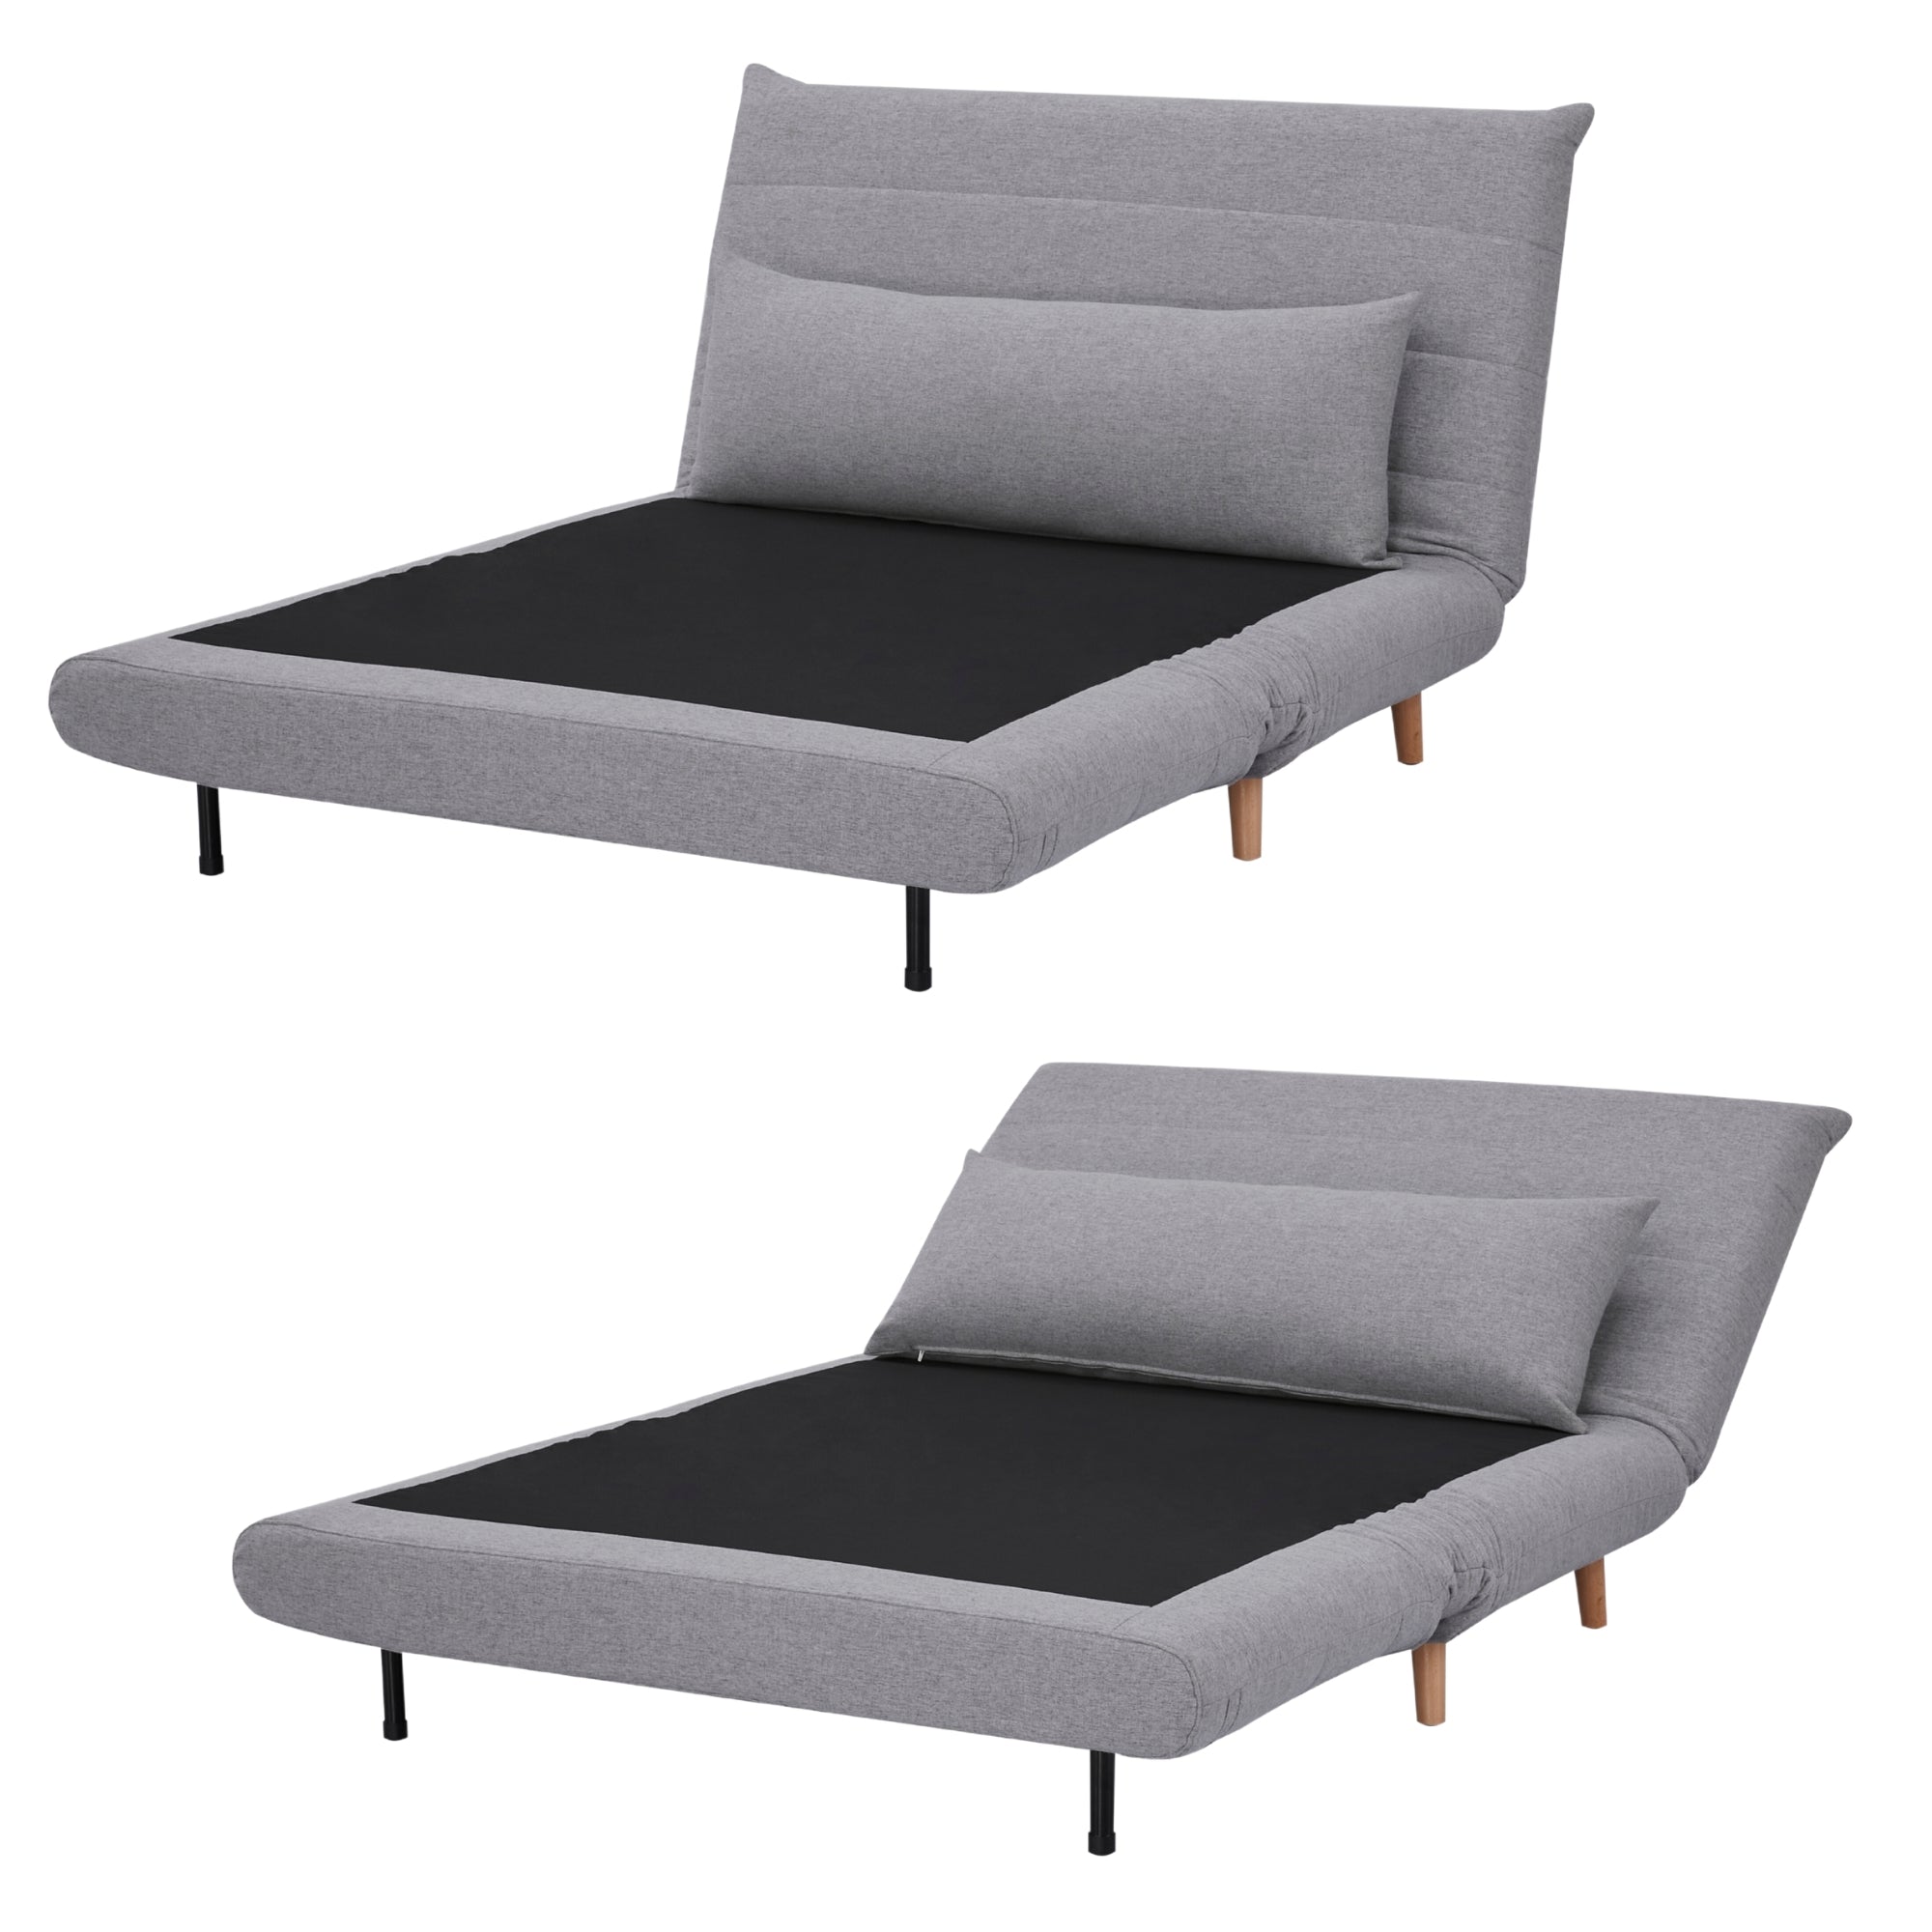 Elegant Grey 2-Seater Sofa Bed, Wooden Legs, Polyester Fabric